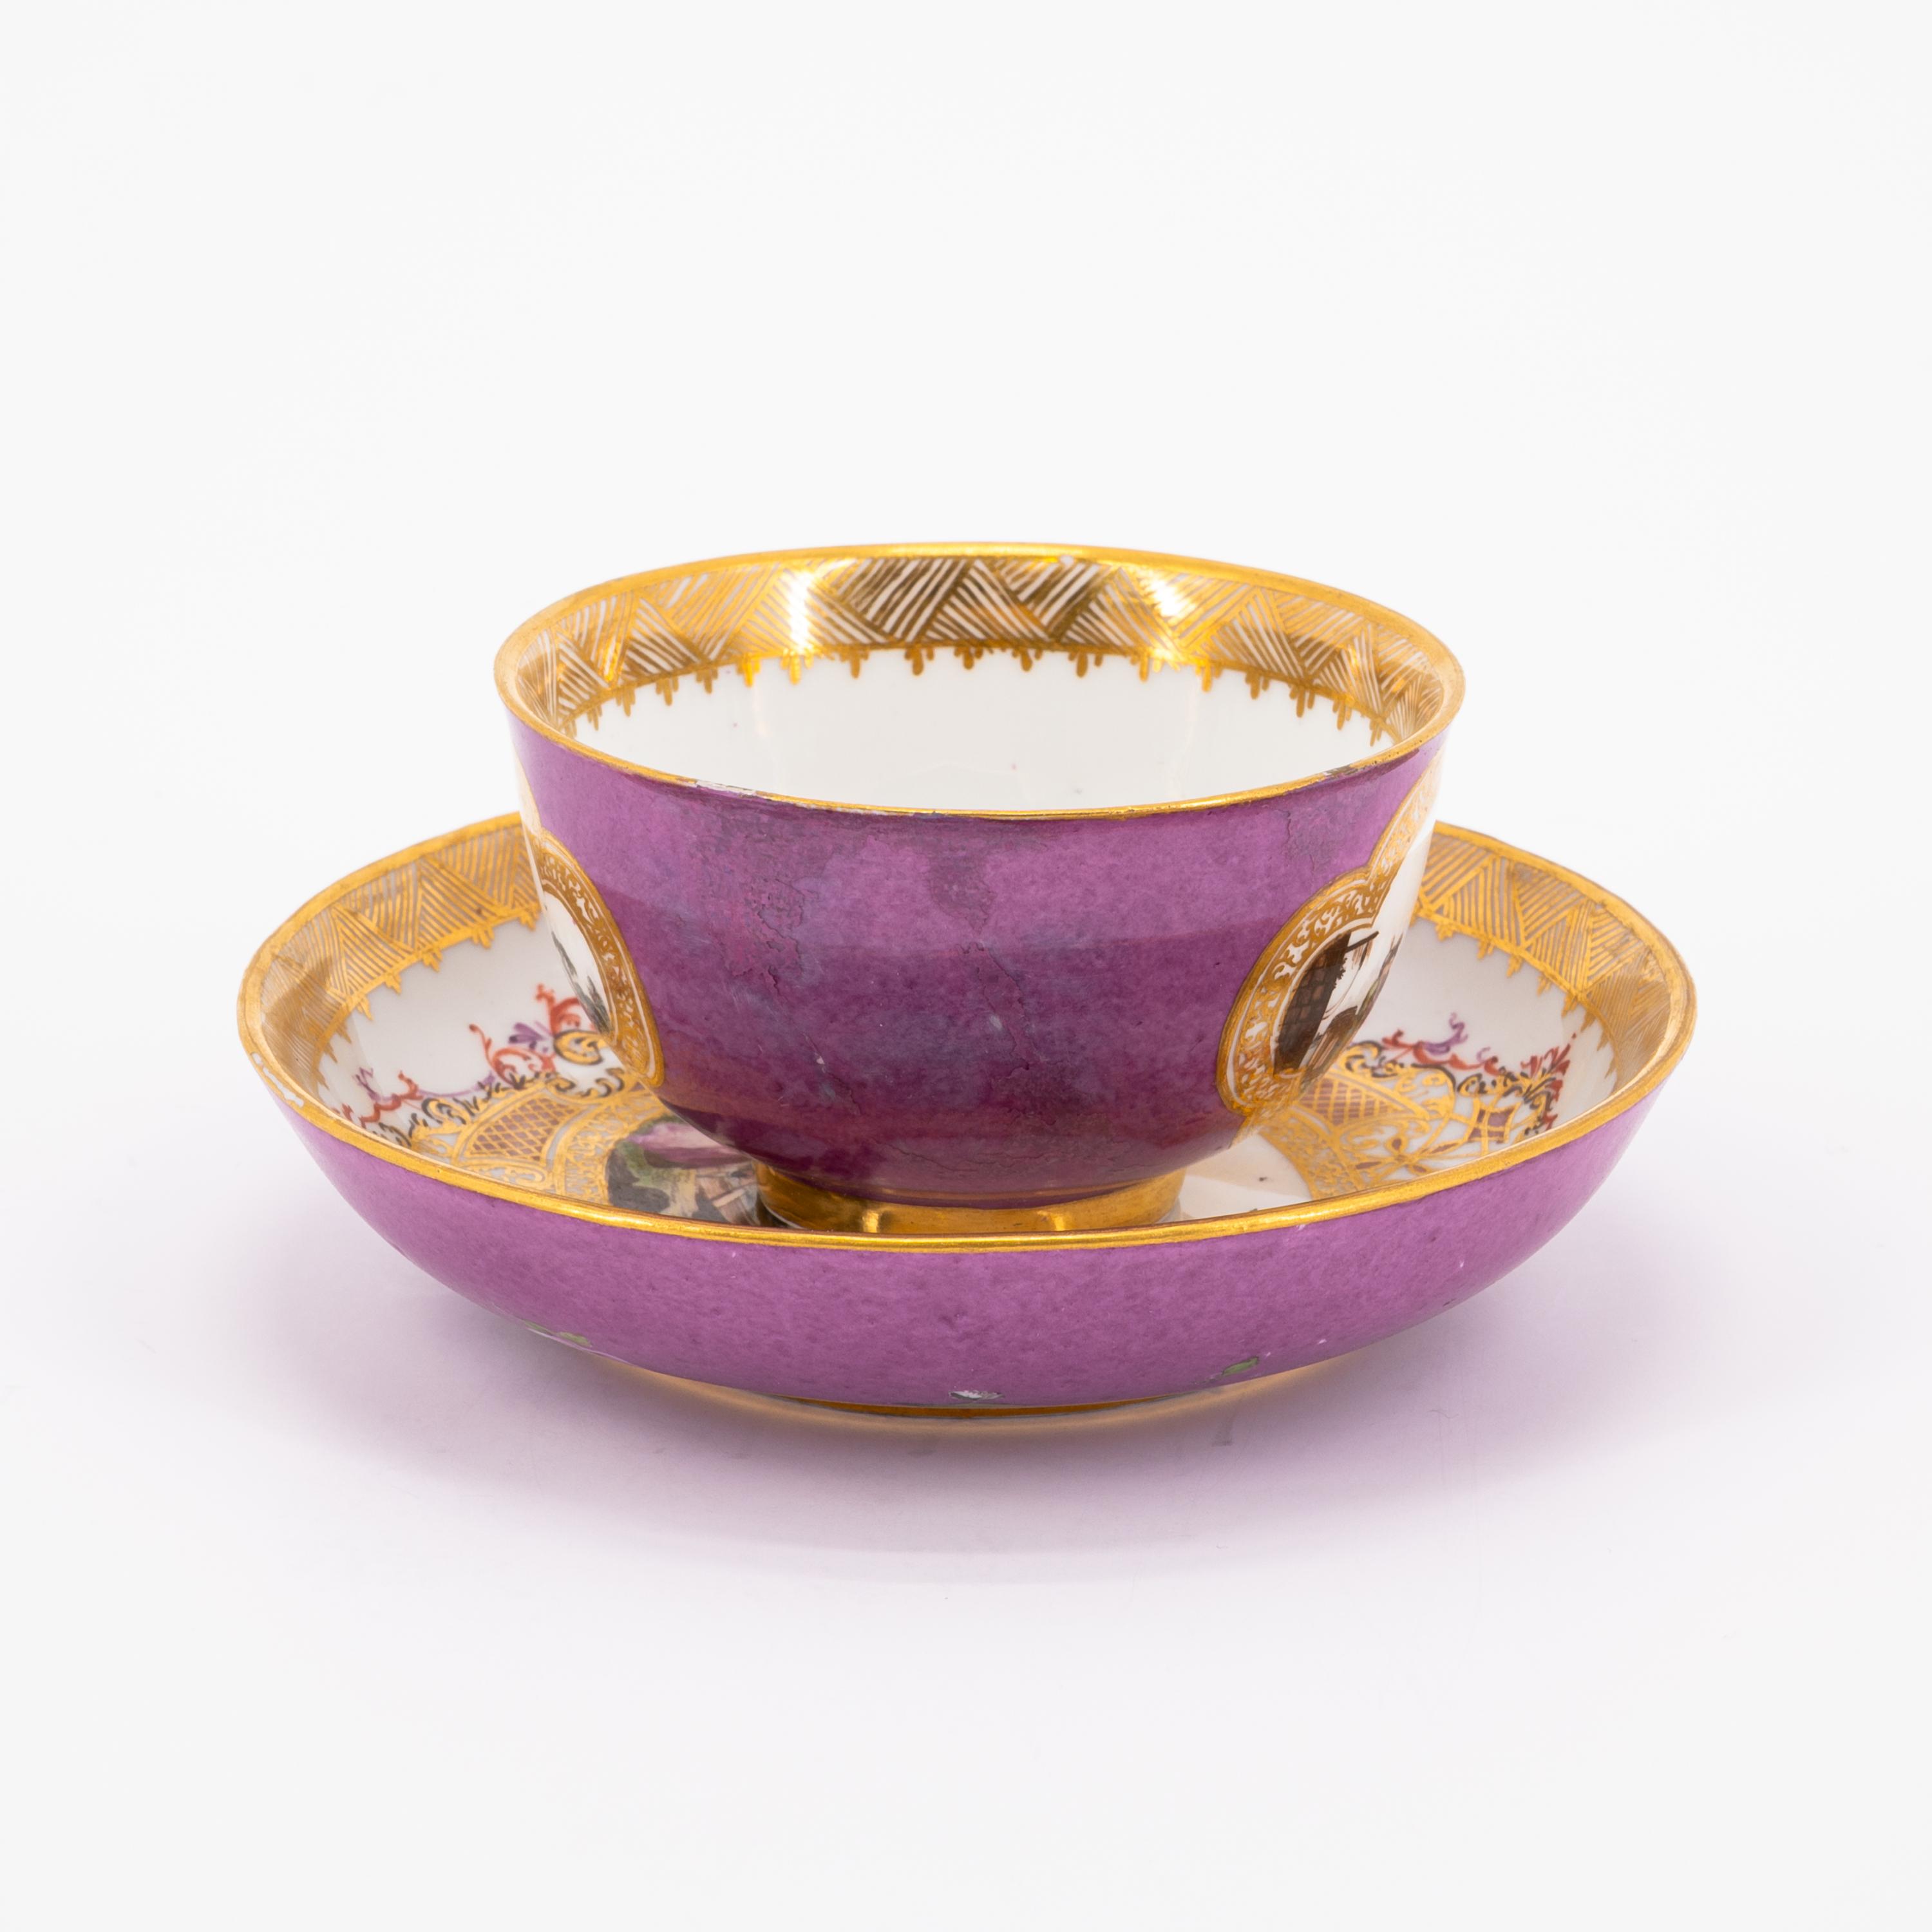 TWO PORCELAIN TEA BOWLS AND TWO SAUCER WITH PURPLE FOND AND MERCHANT NAVY SCENE - Image 7 of 11